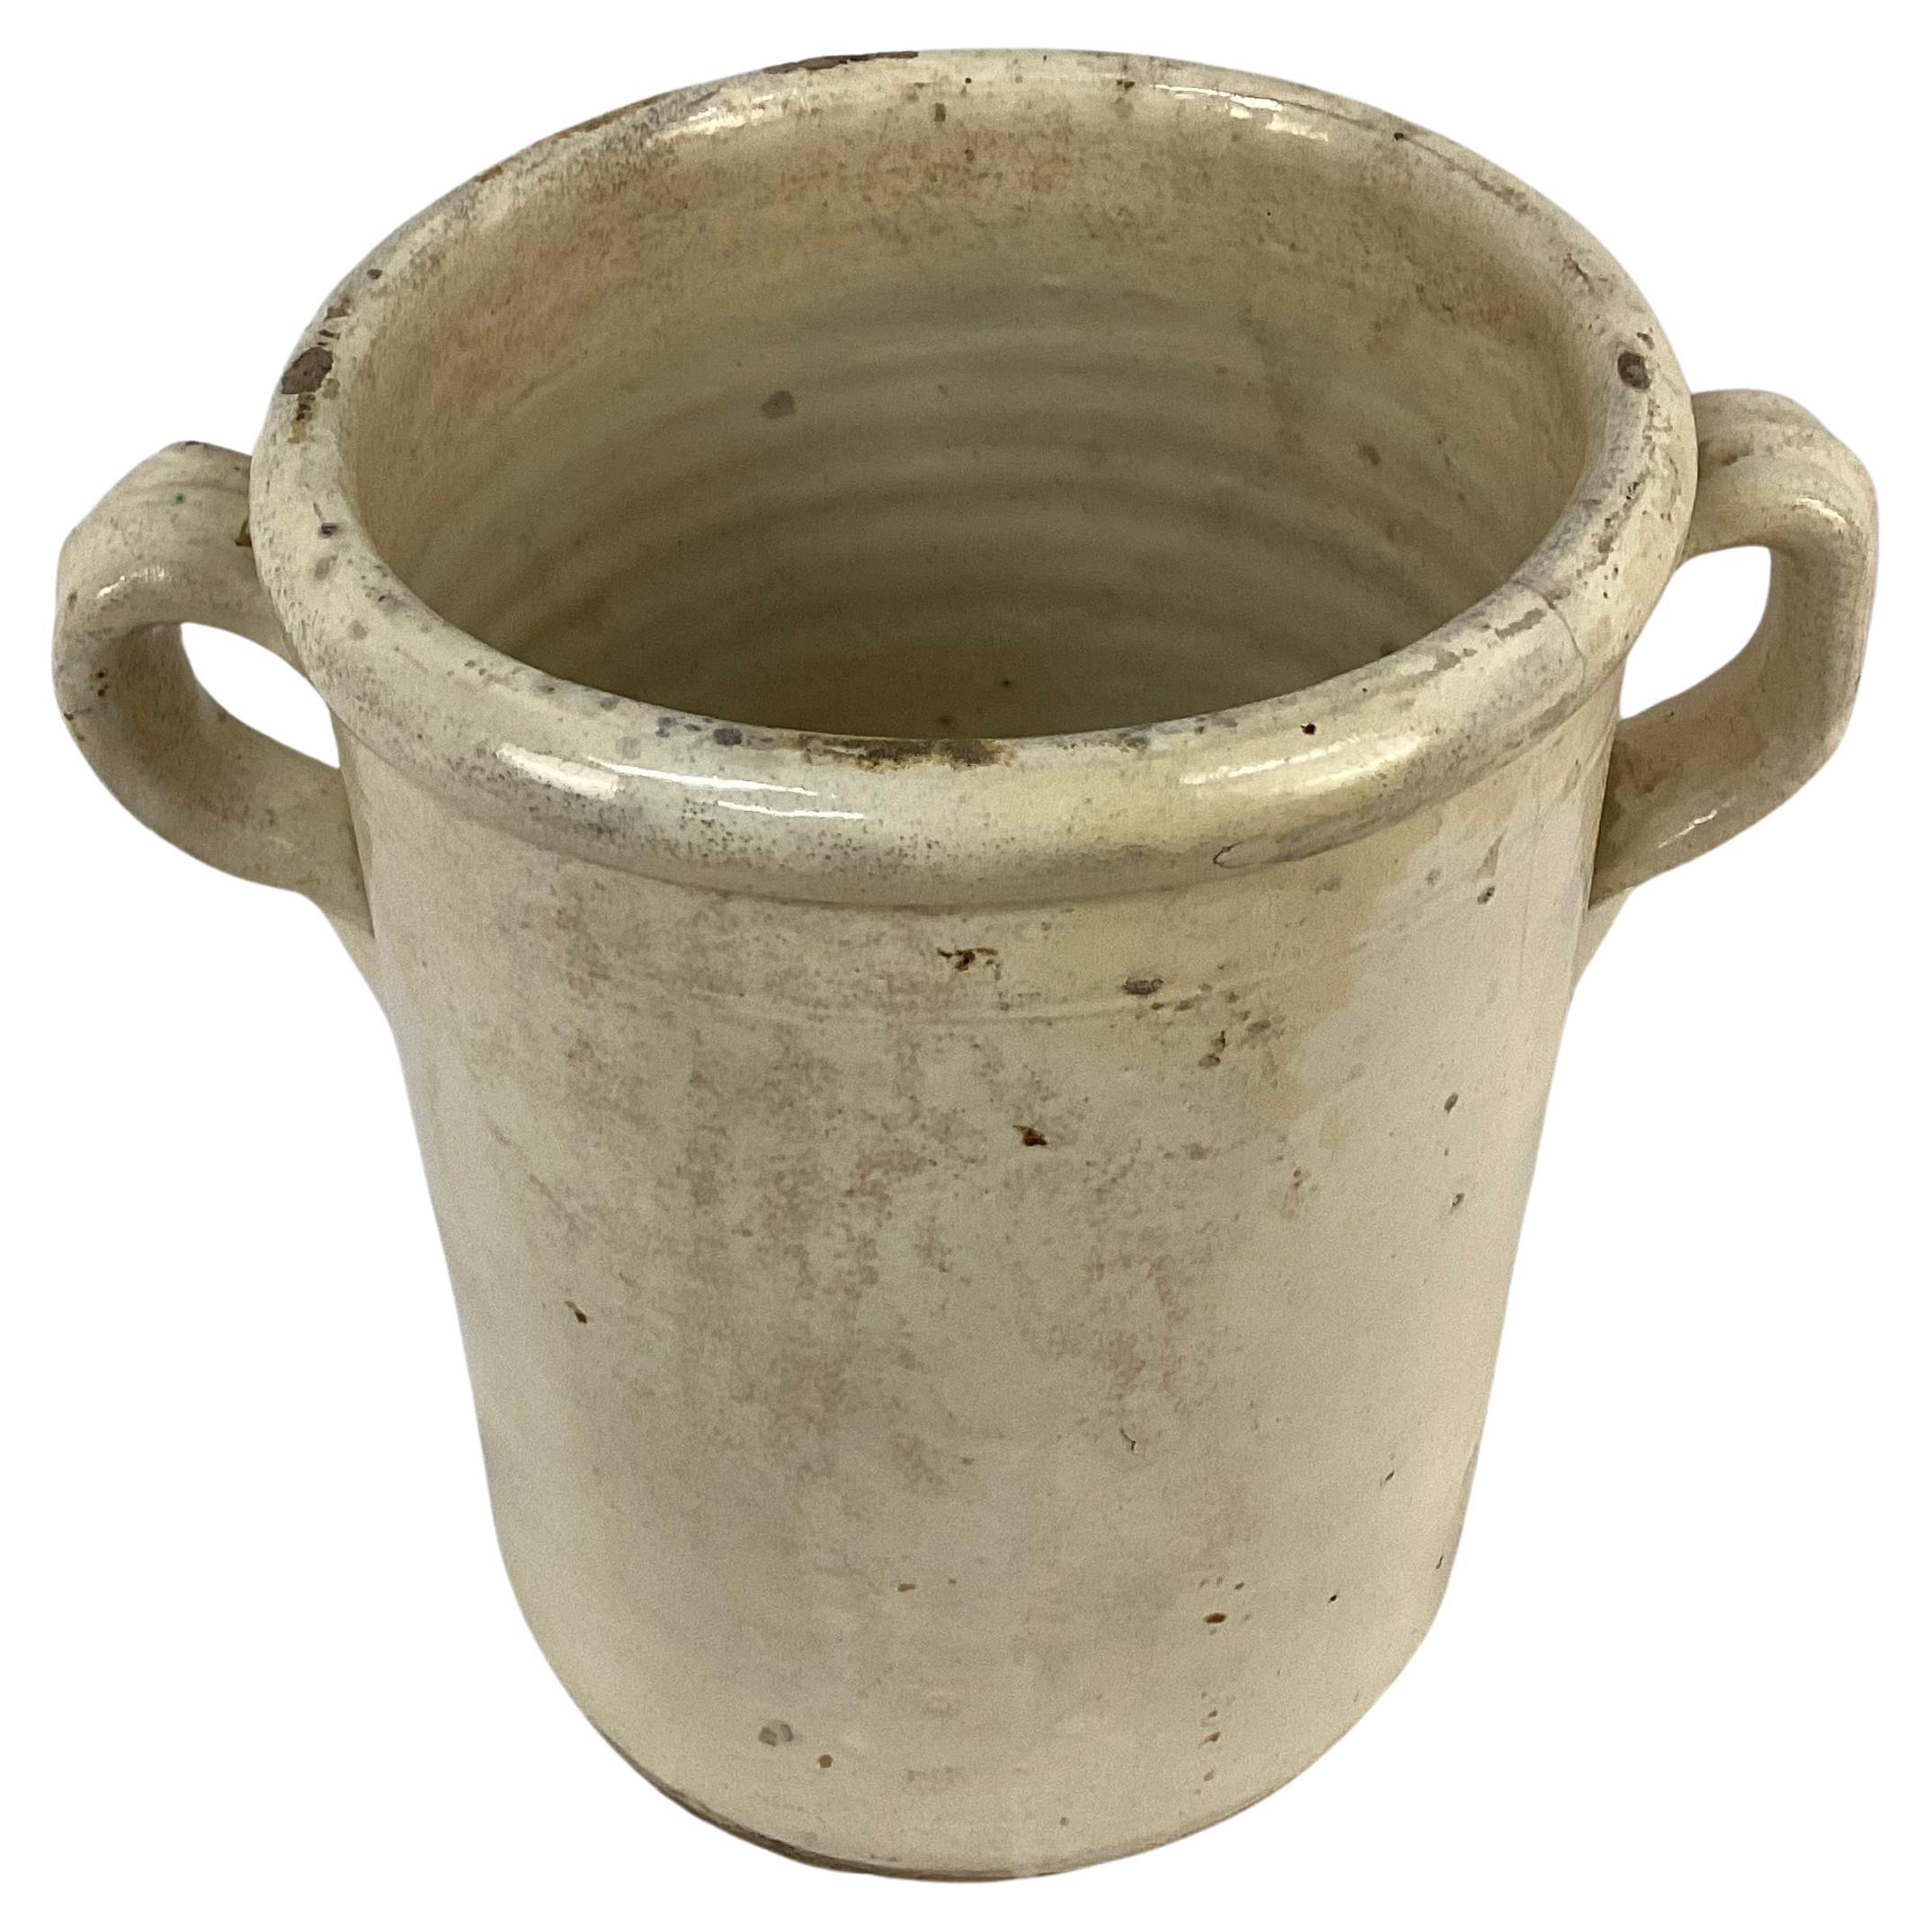 19th Century Italian ceramic chiminea preserve pot with handles. These pots were used to preserve food such as fruits, meat or vegetables. They were designed to be used in conjunction with wood-burning stove or fireplace as warmth helped preserve